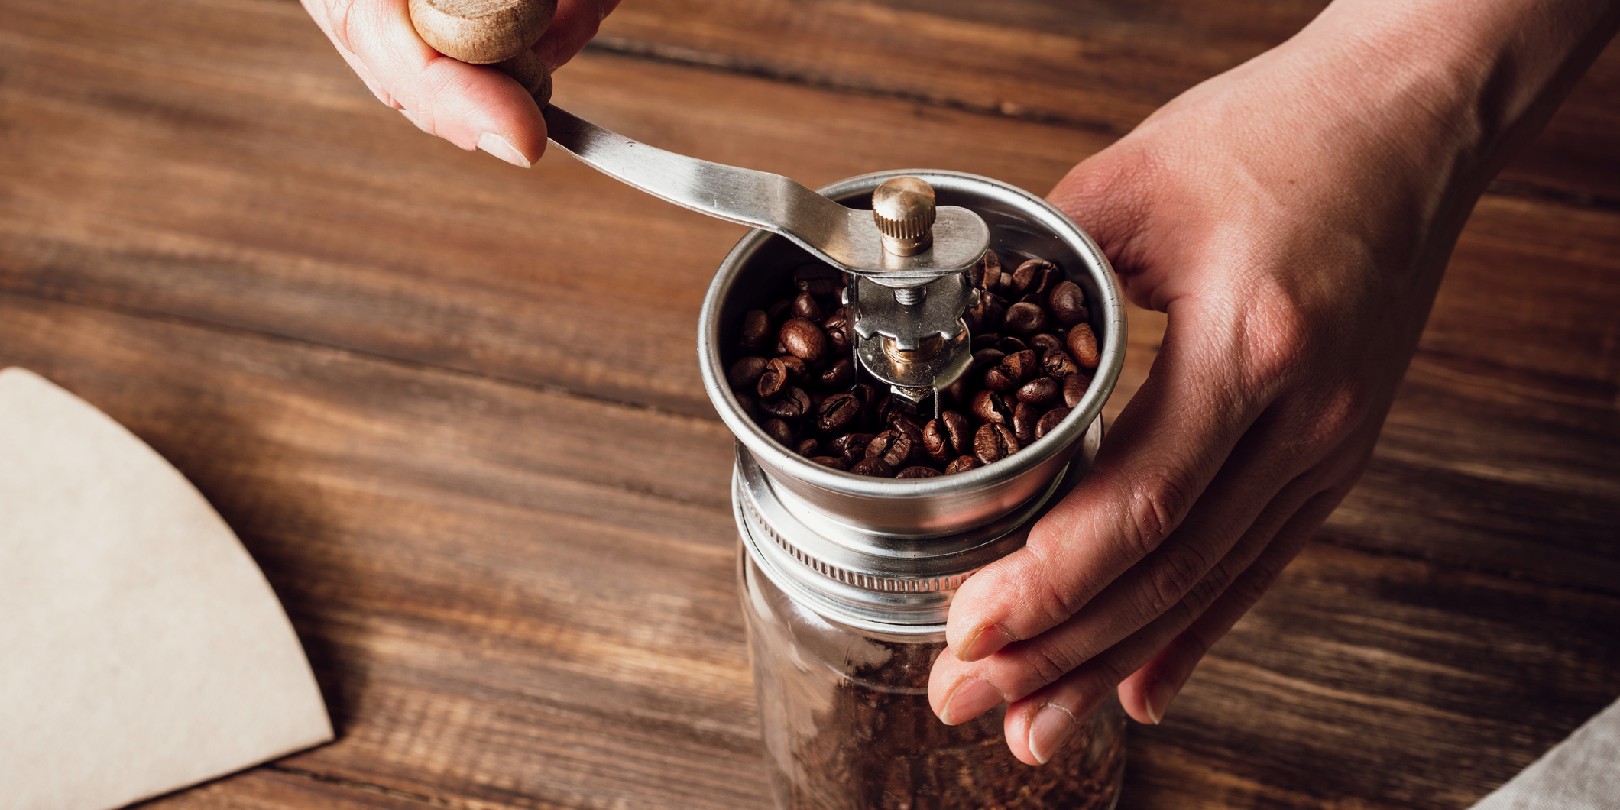 How To Grind Coffee Beans Correctly - Cuisine at Home